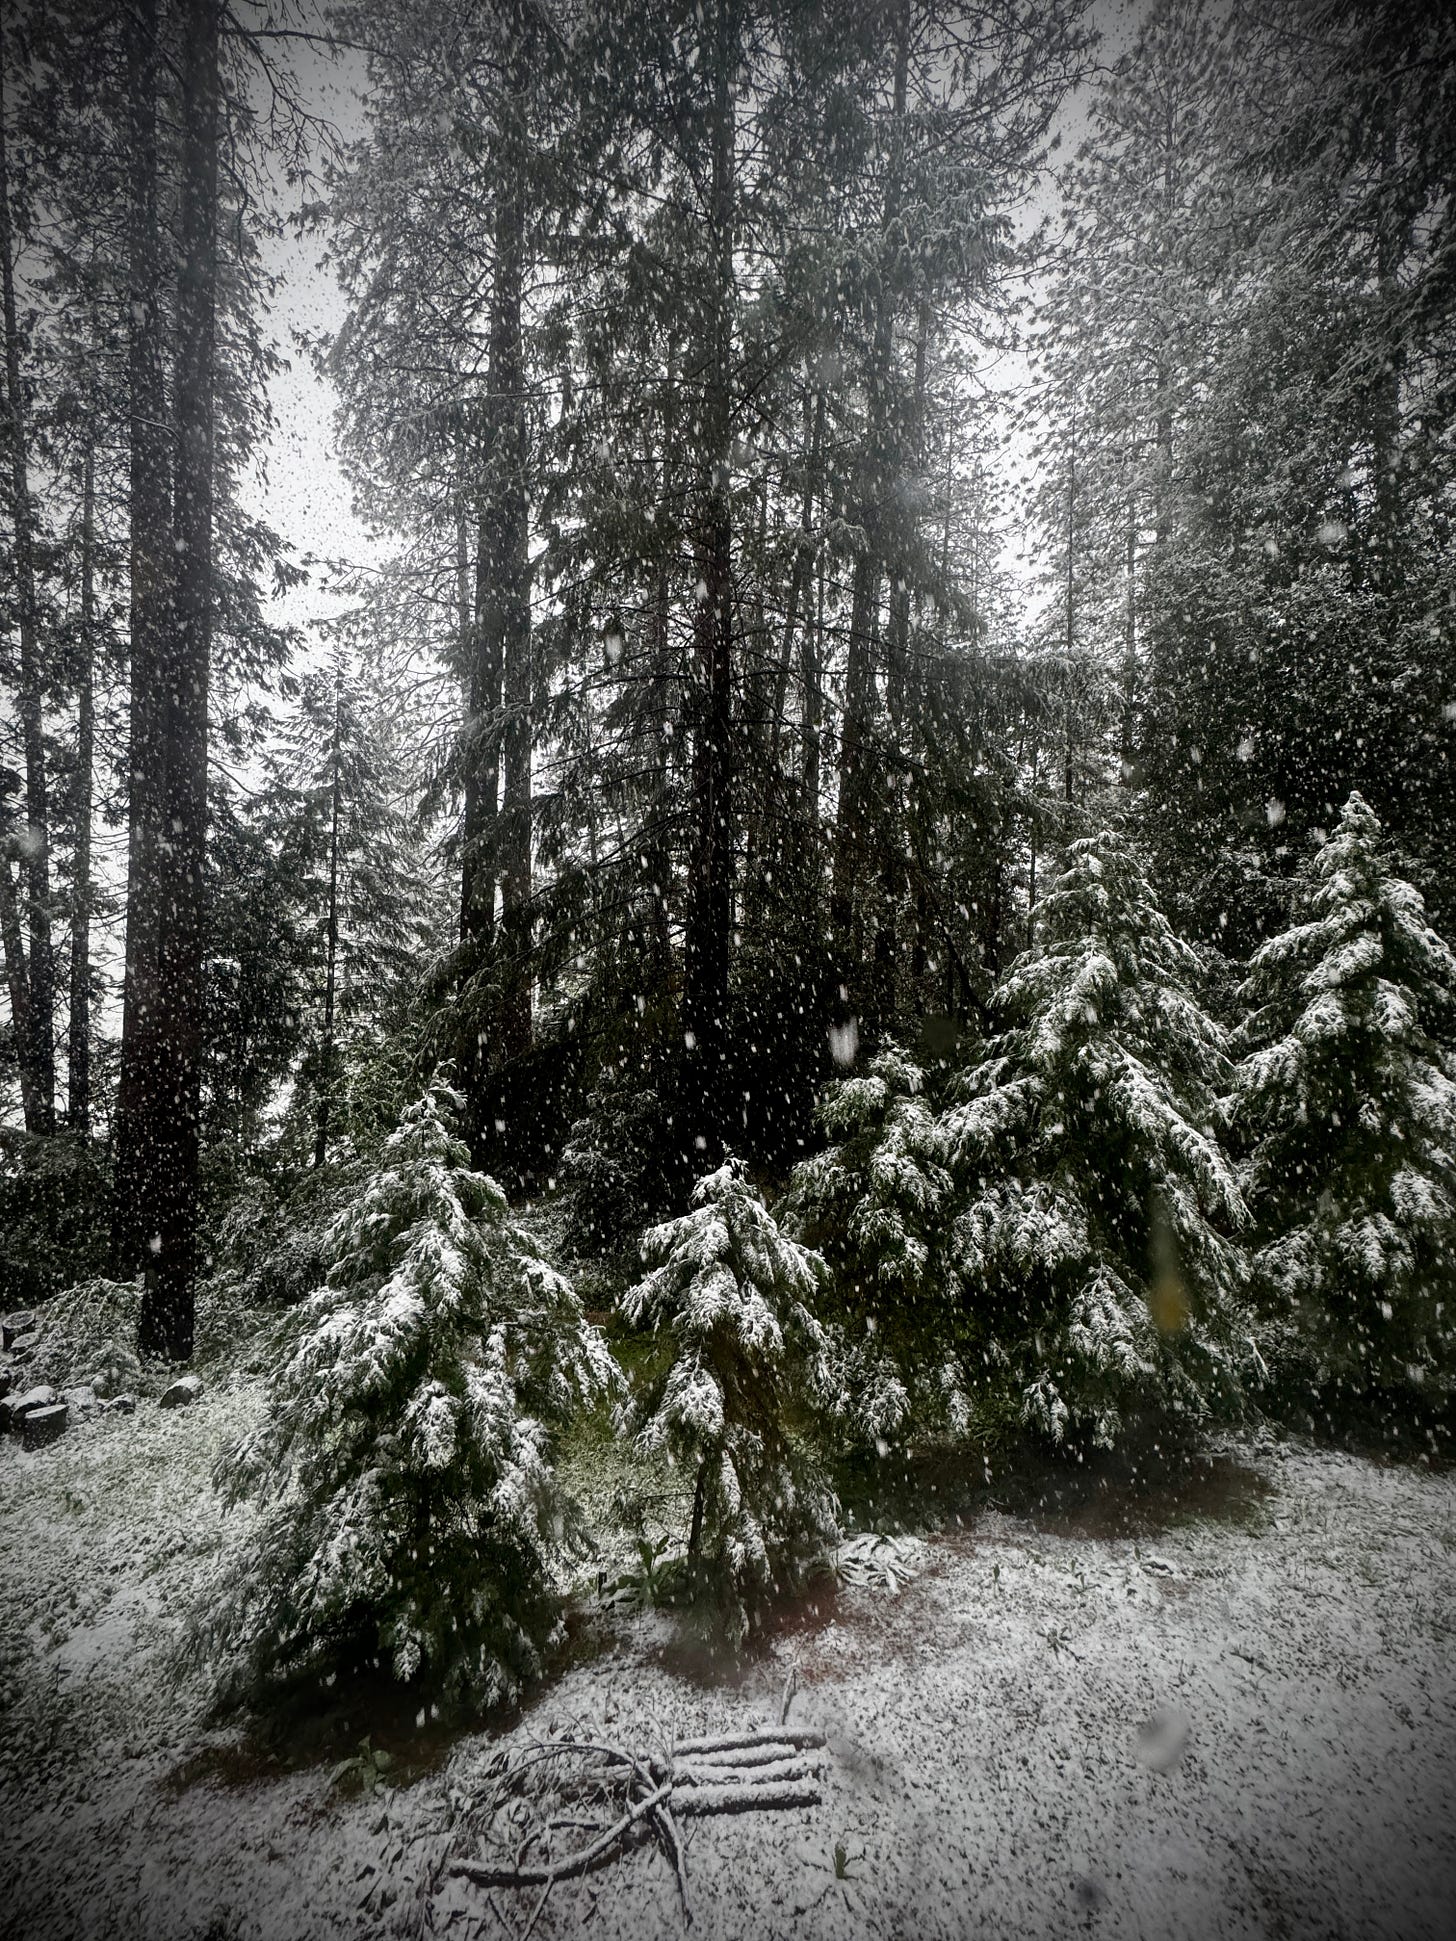 Snowy day in May in California